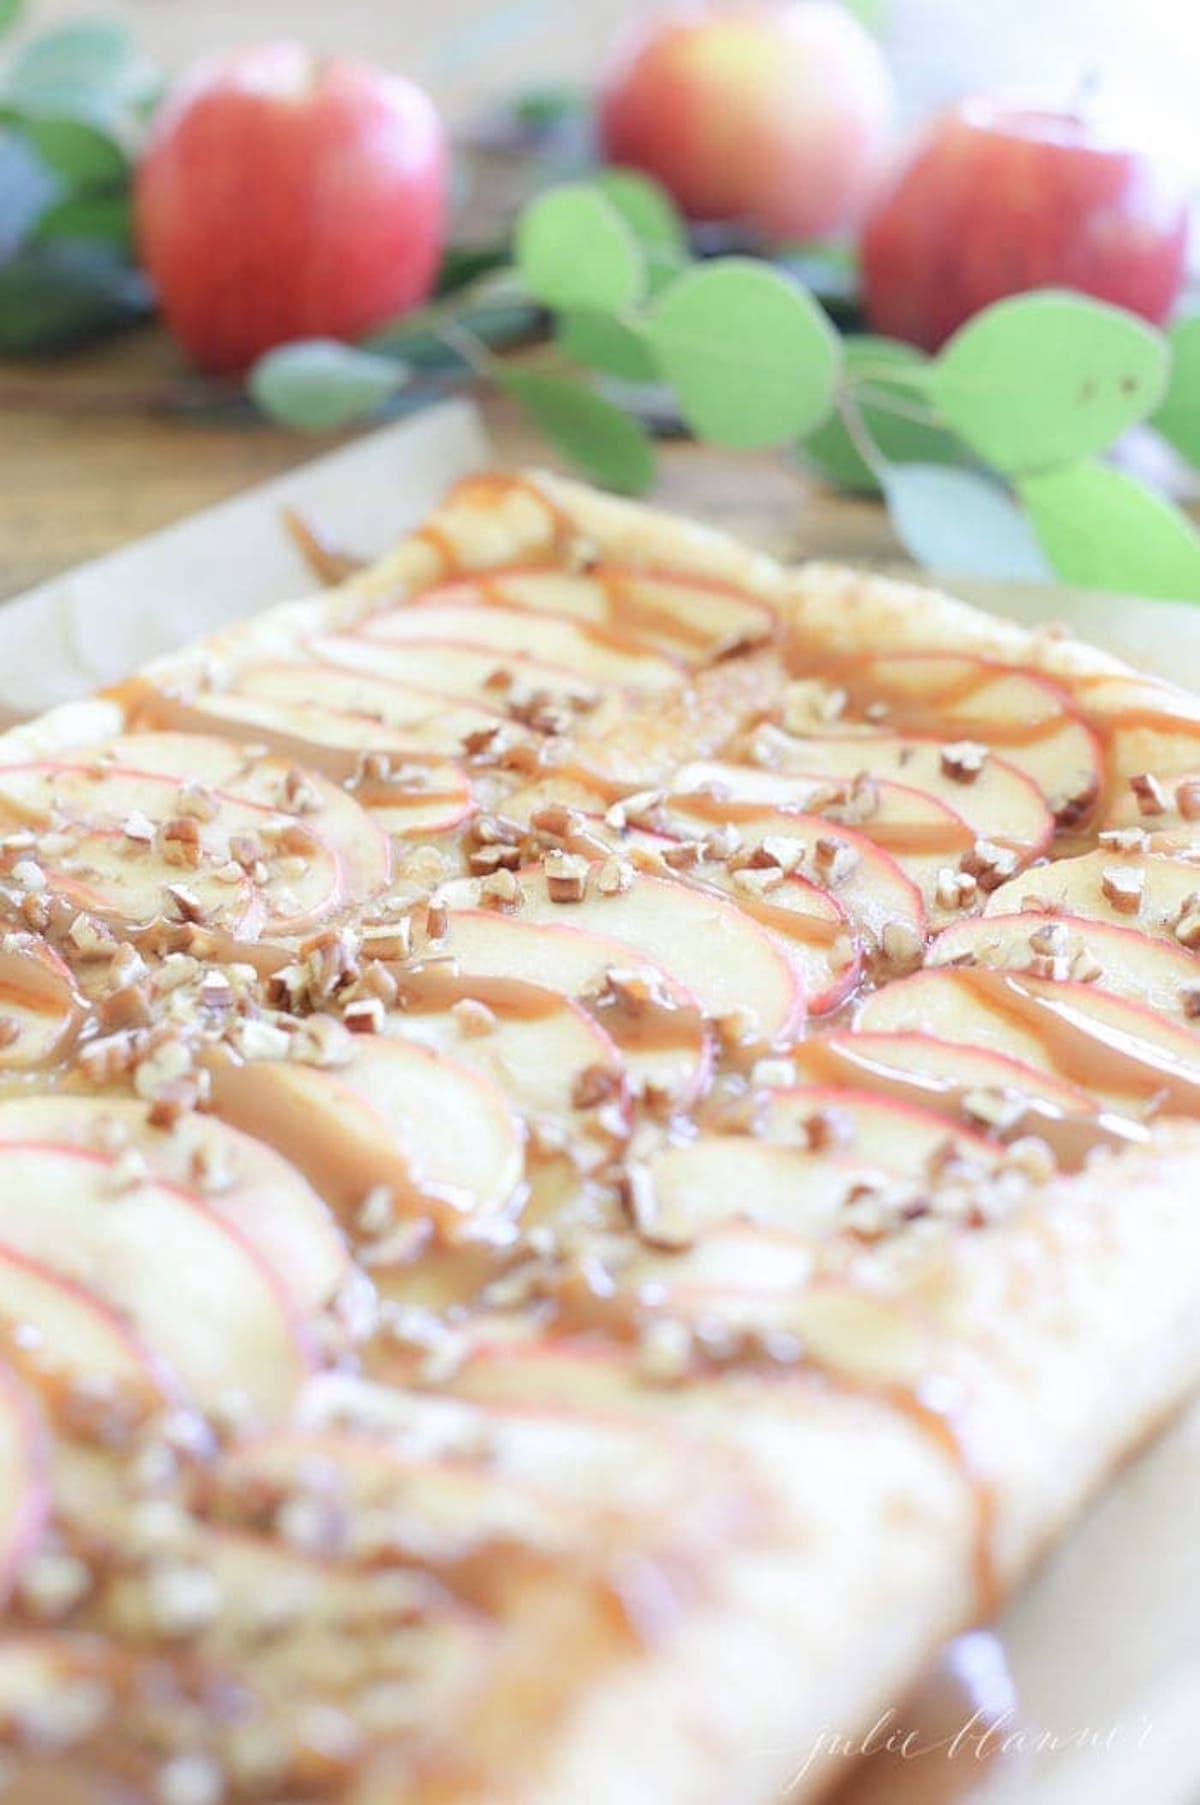 A delectable apple pie slice generously drizzled with a luscious caramel sauce.